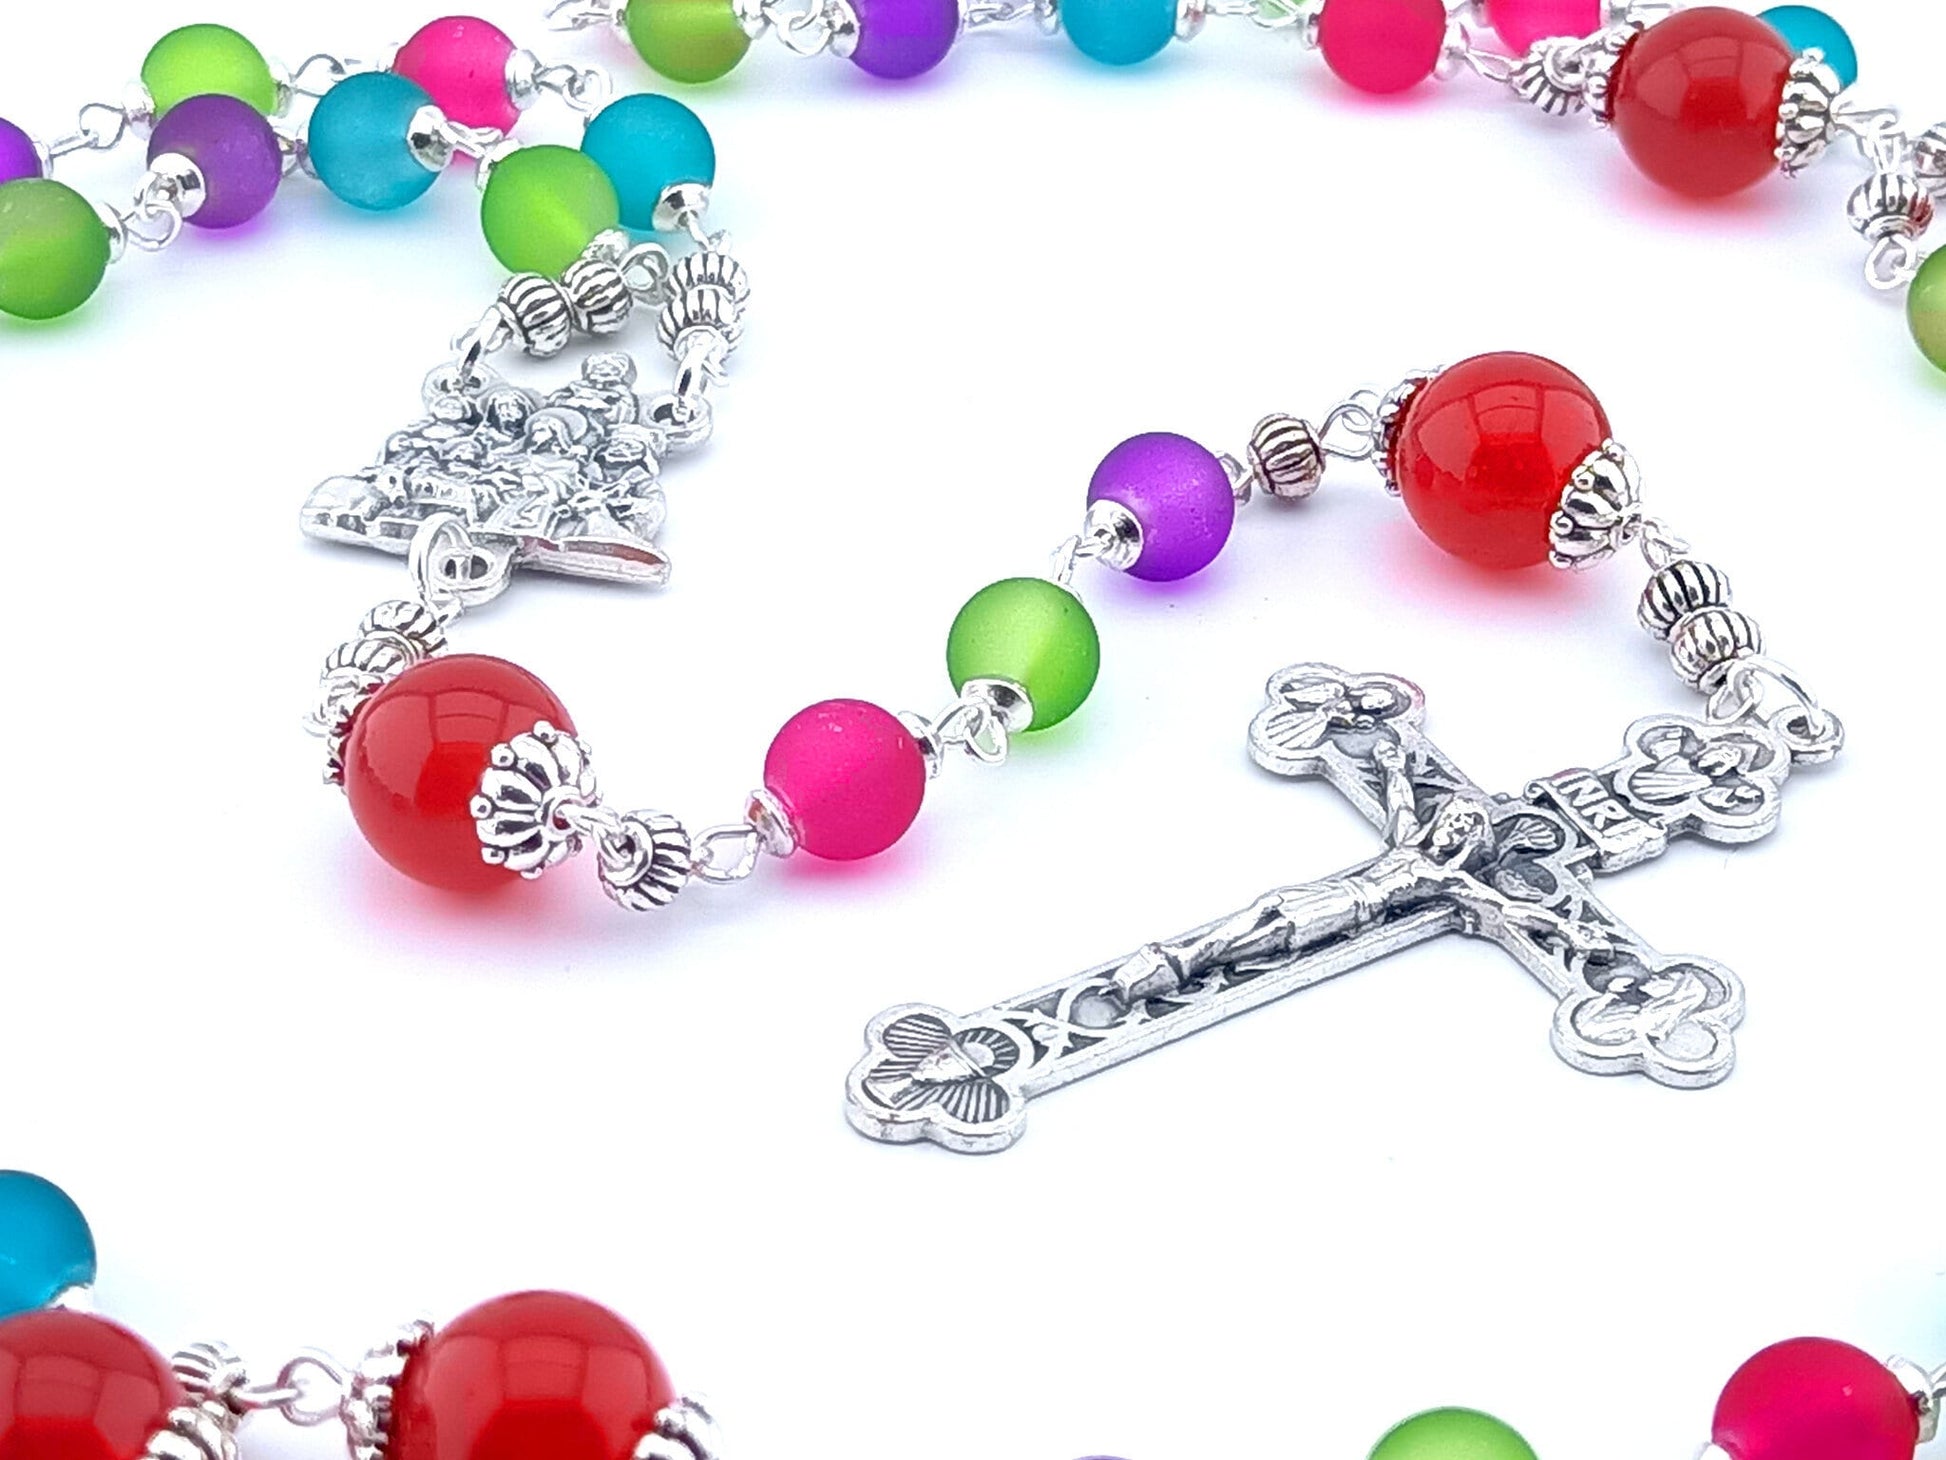 The Nativity unique rosary beads with multicoloured glass beads, silver Holy Spirit crucifix, Nativity centre medal and silver linking beads.